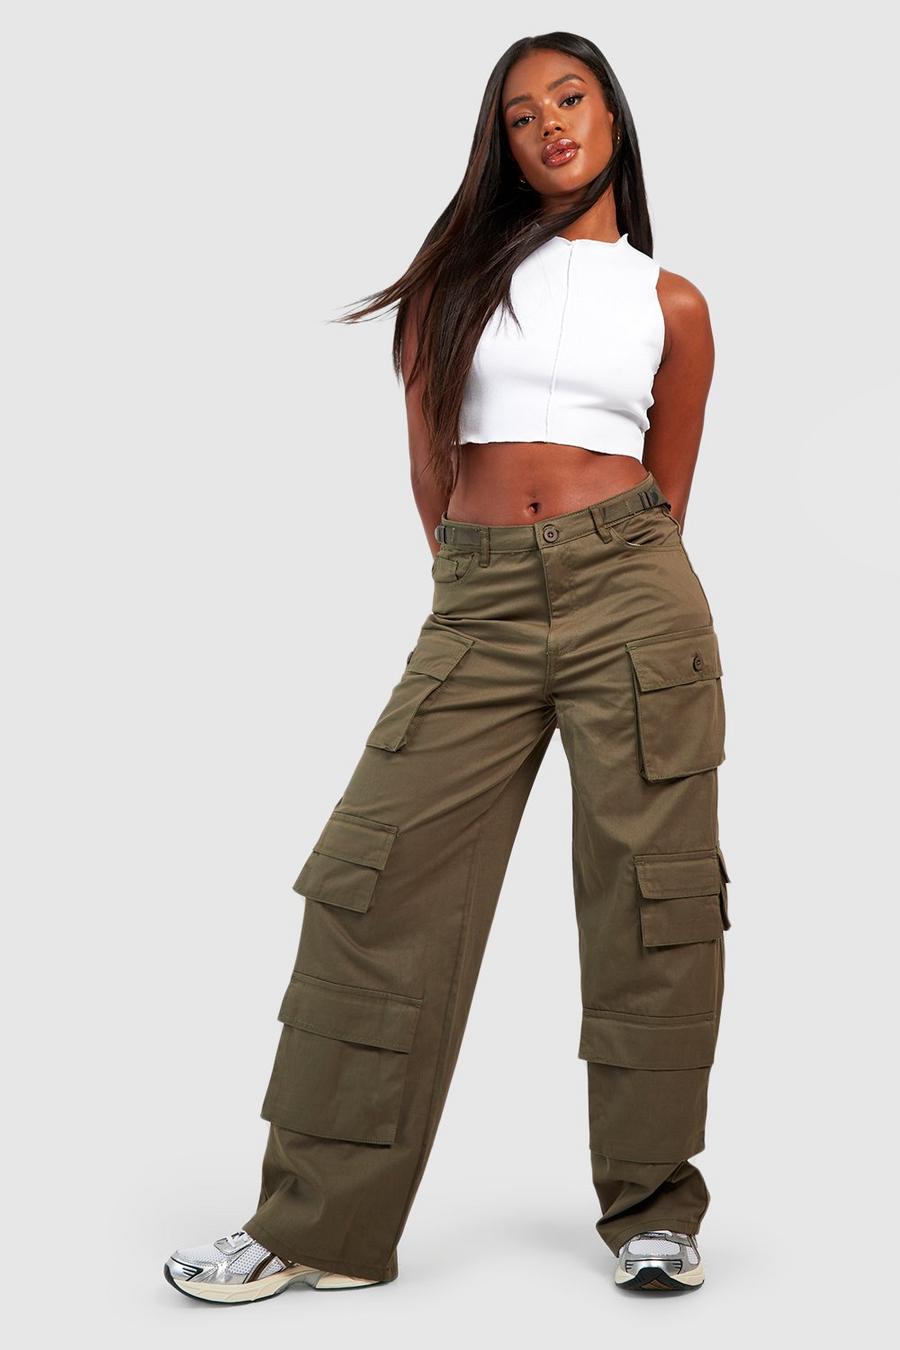 Viral adjustable waist cargo pants🛍️ Size - 24 to 34